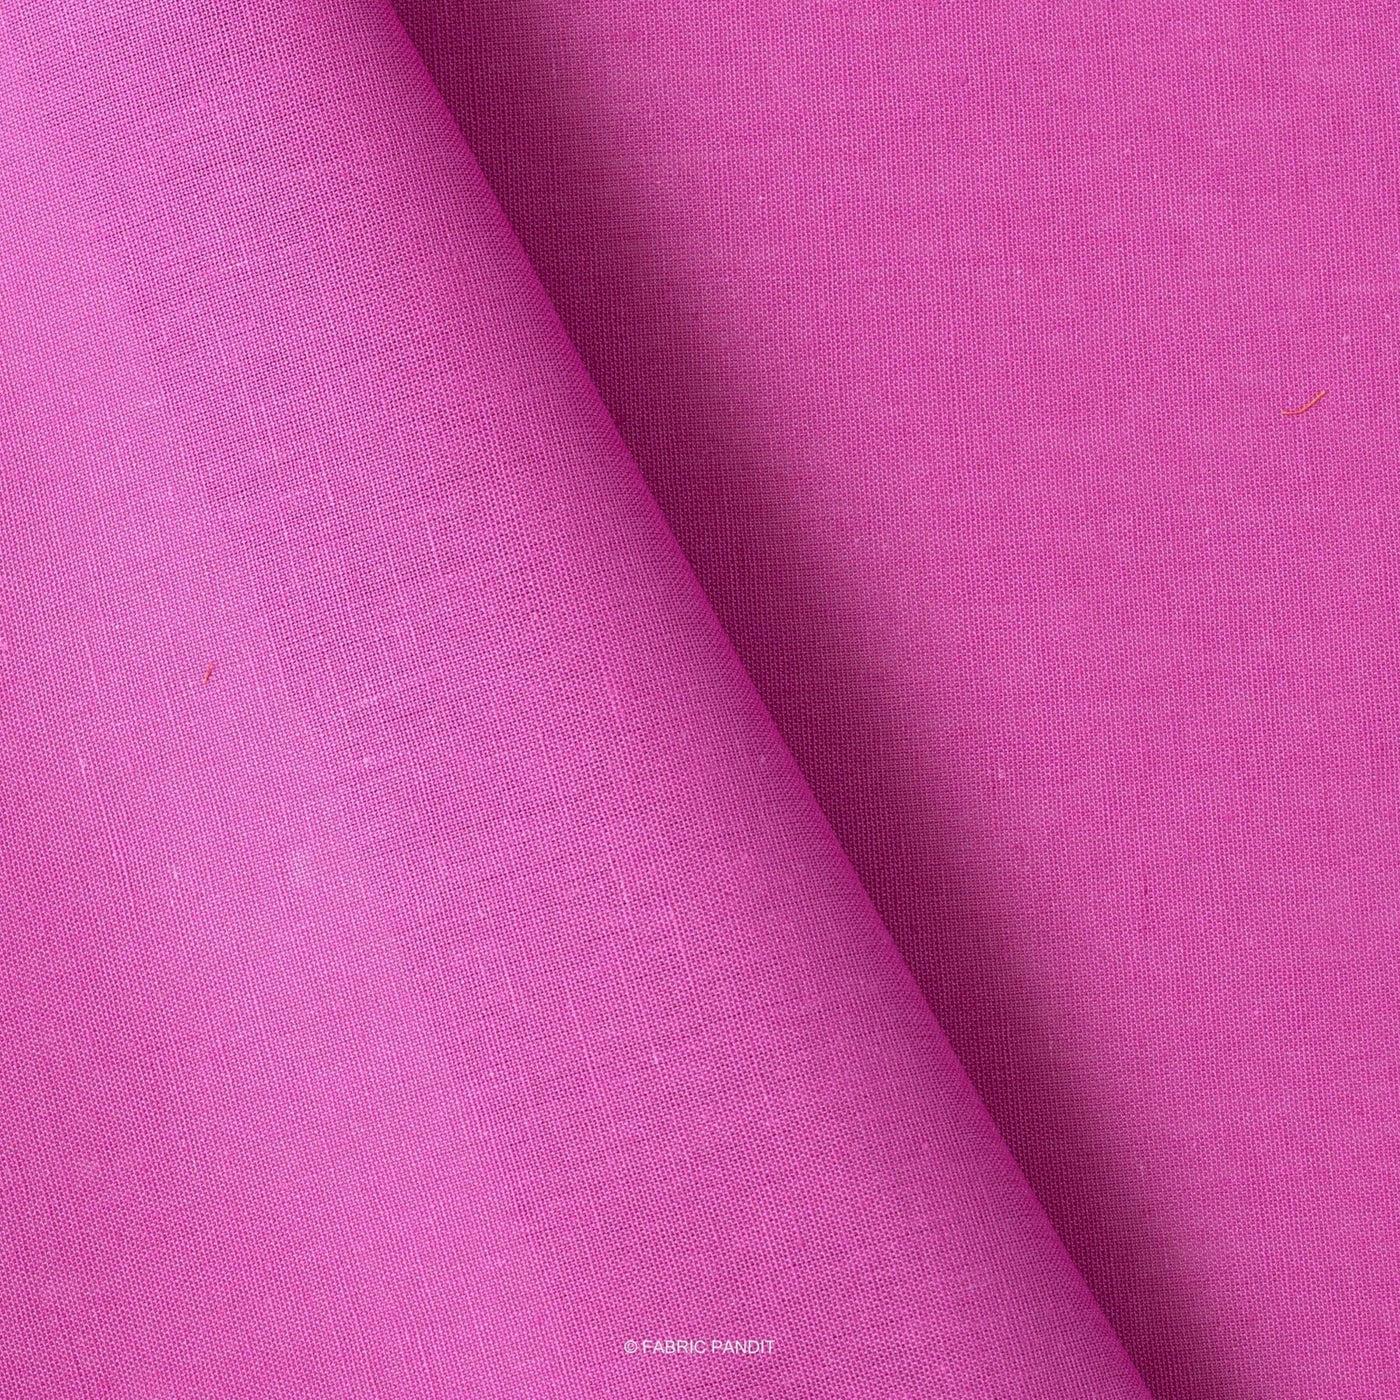 Fabric Pandit Fabric Hot Pink Color Pure Cotton Linen Fabric (Width 42 Inches)